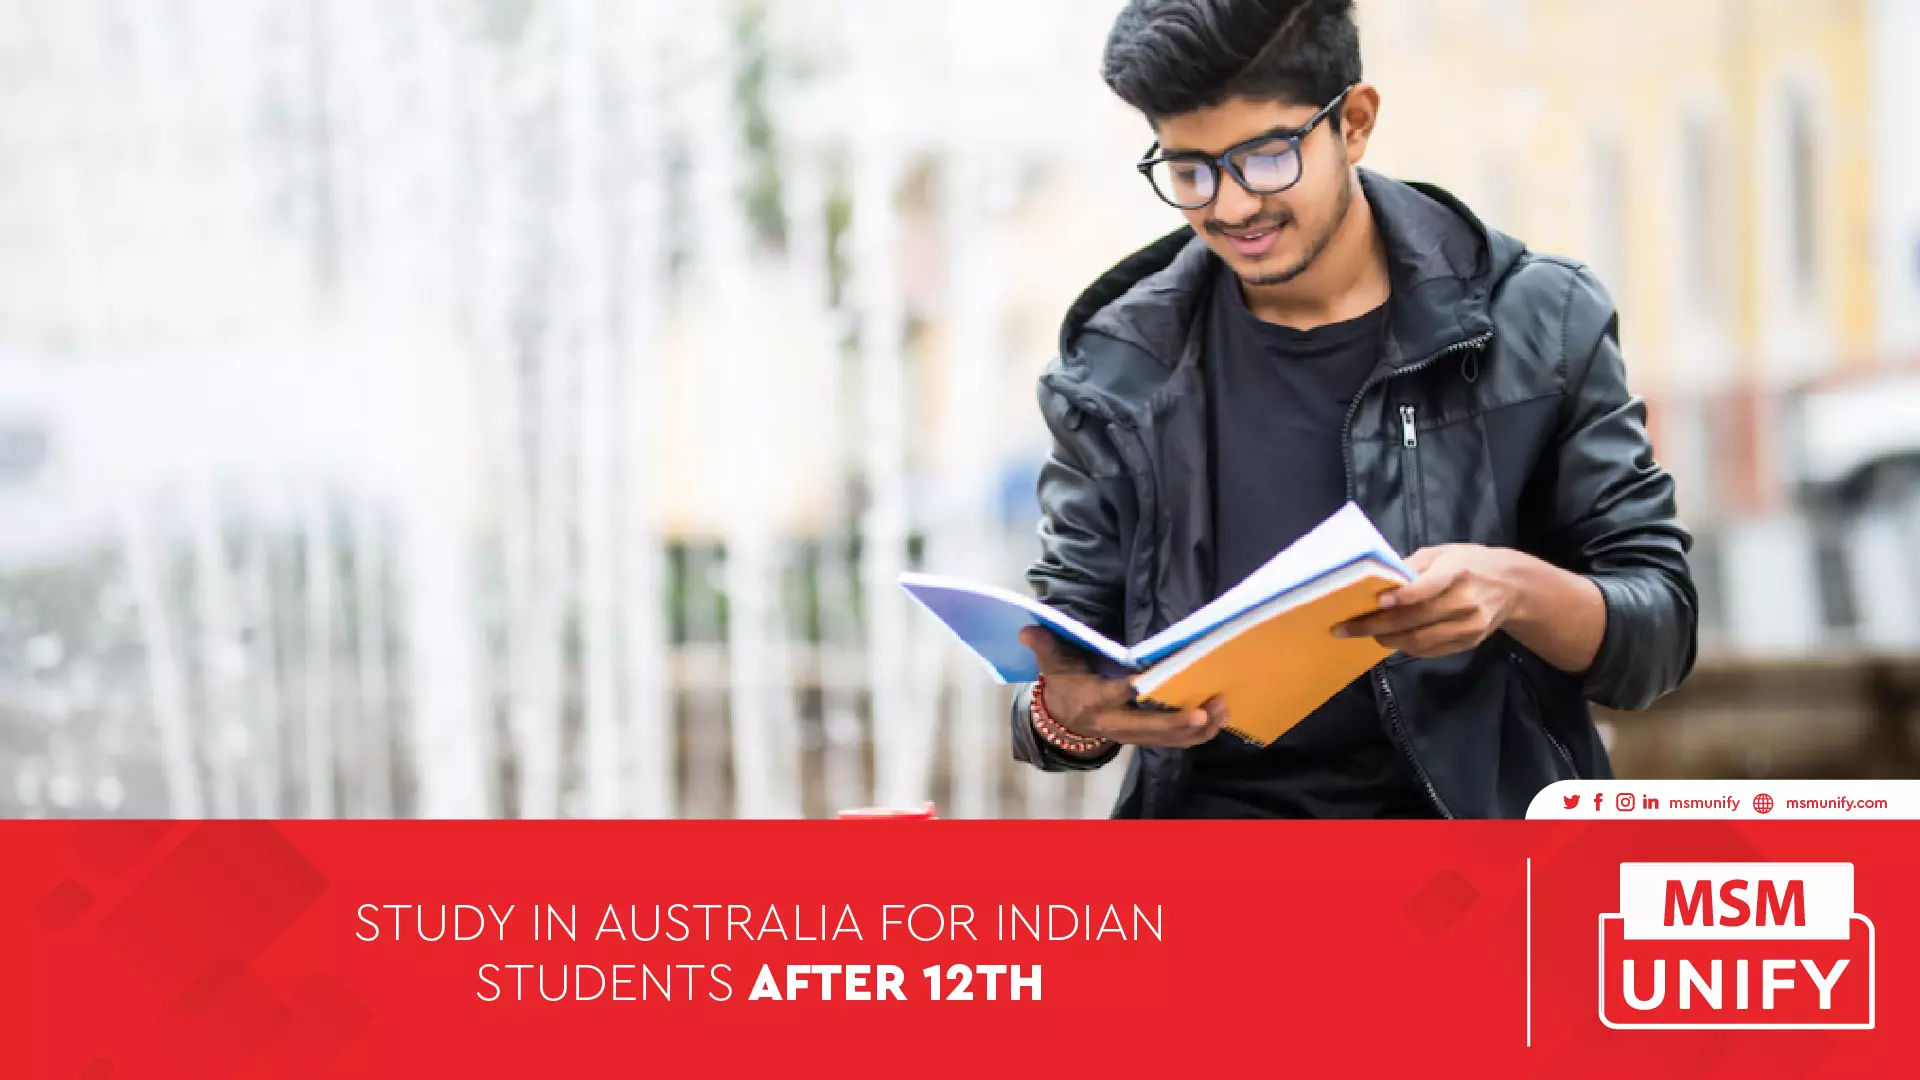 122022 MSM Unify Study in Australia for Indian Students After 12th 01